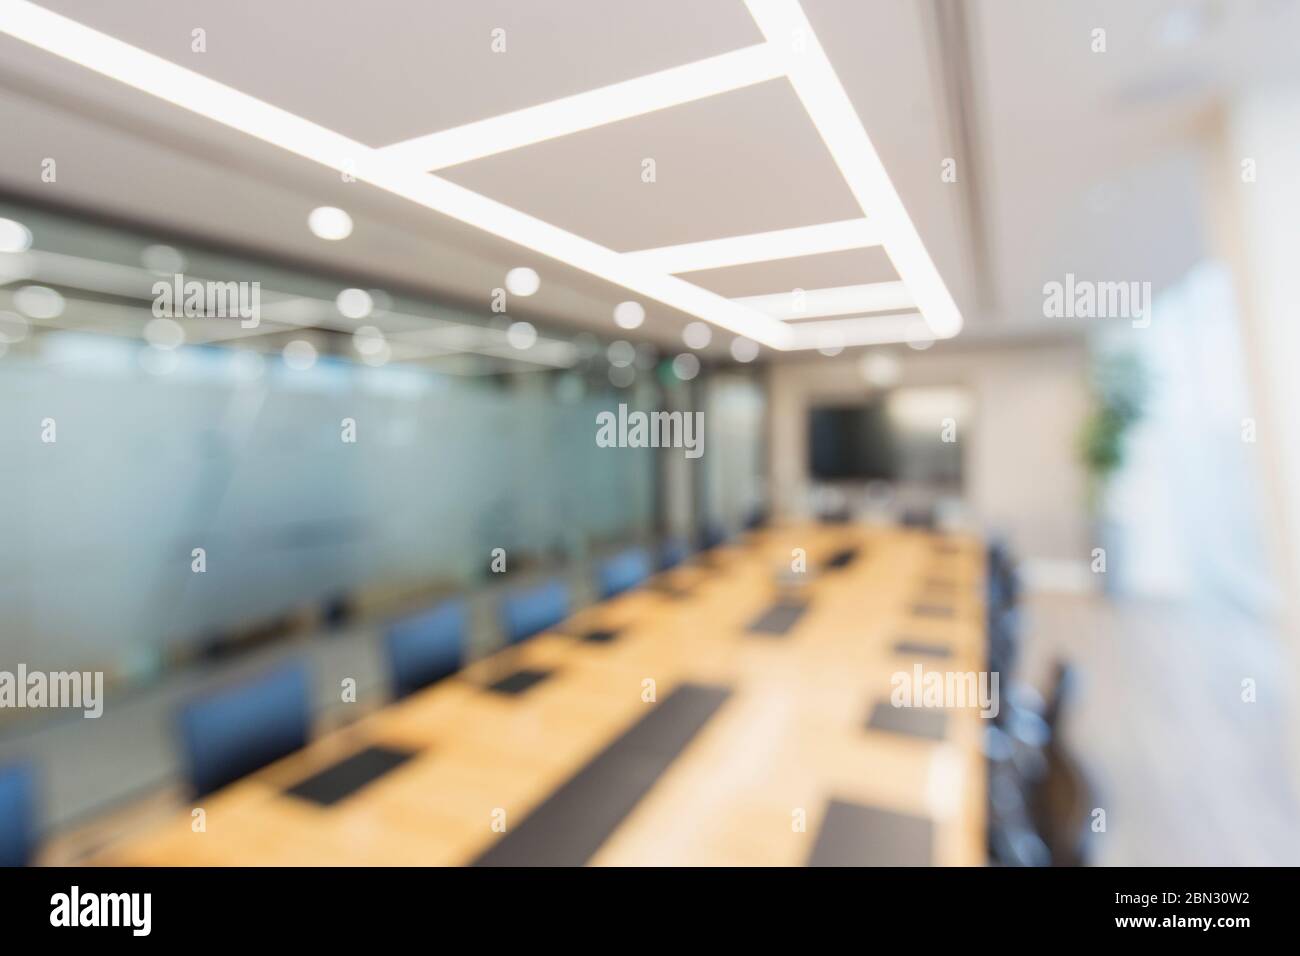 Long table in modern business conference room Stock Photo